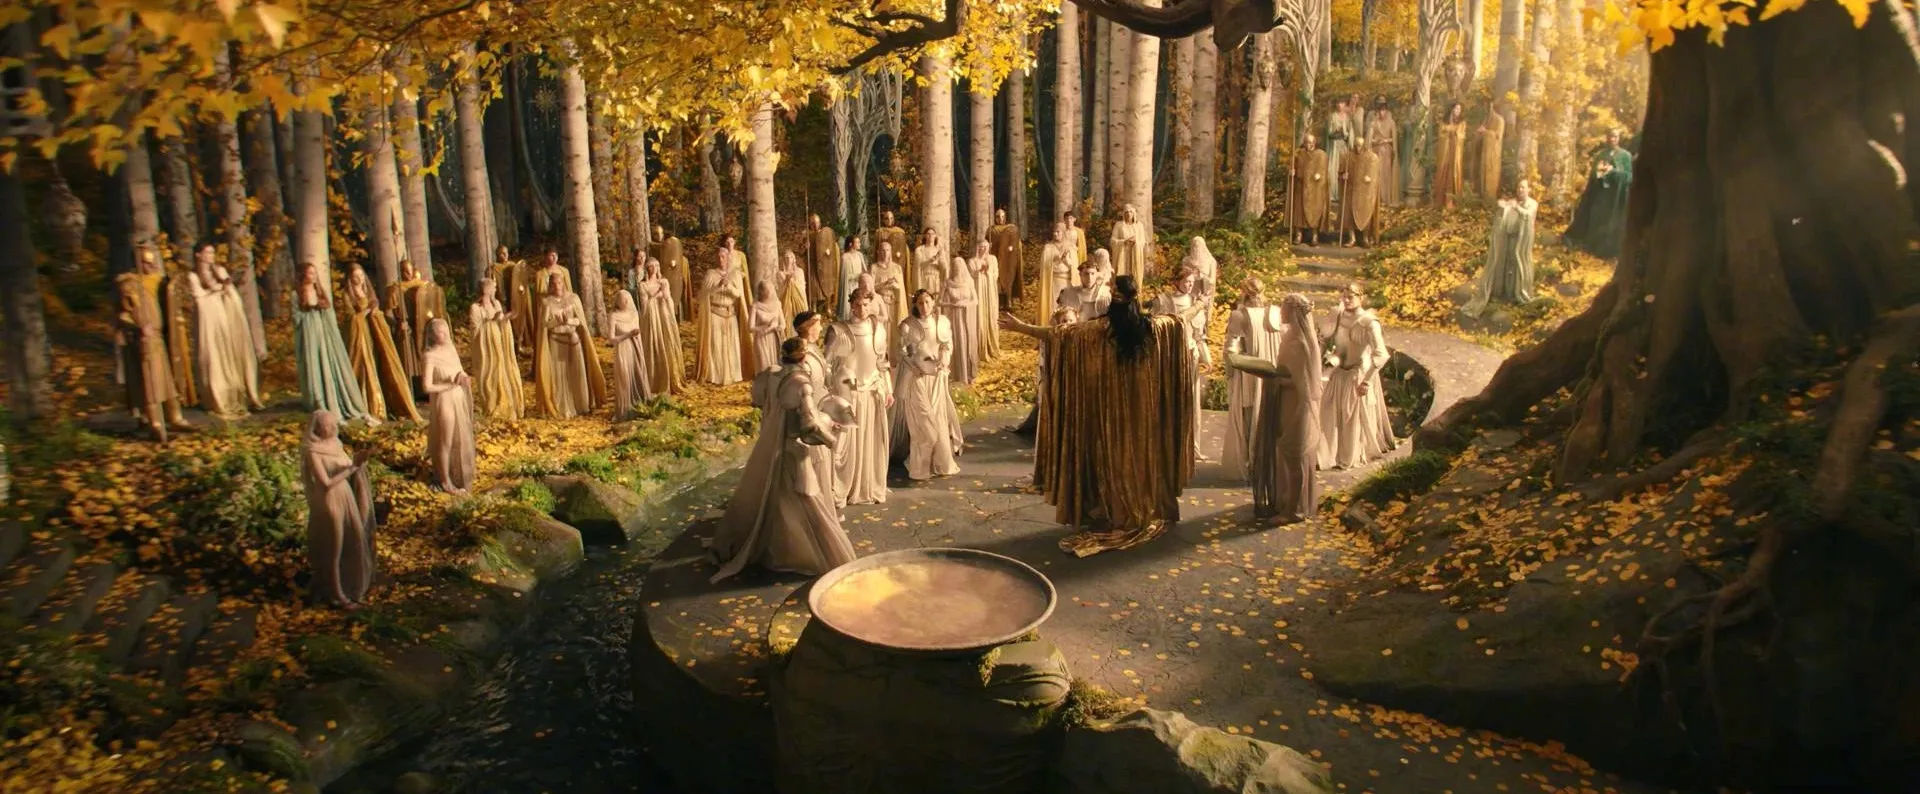 Landscapes and customs in 'The Lord of the Rings: The Rings of Power' | FMV6